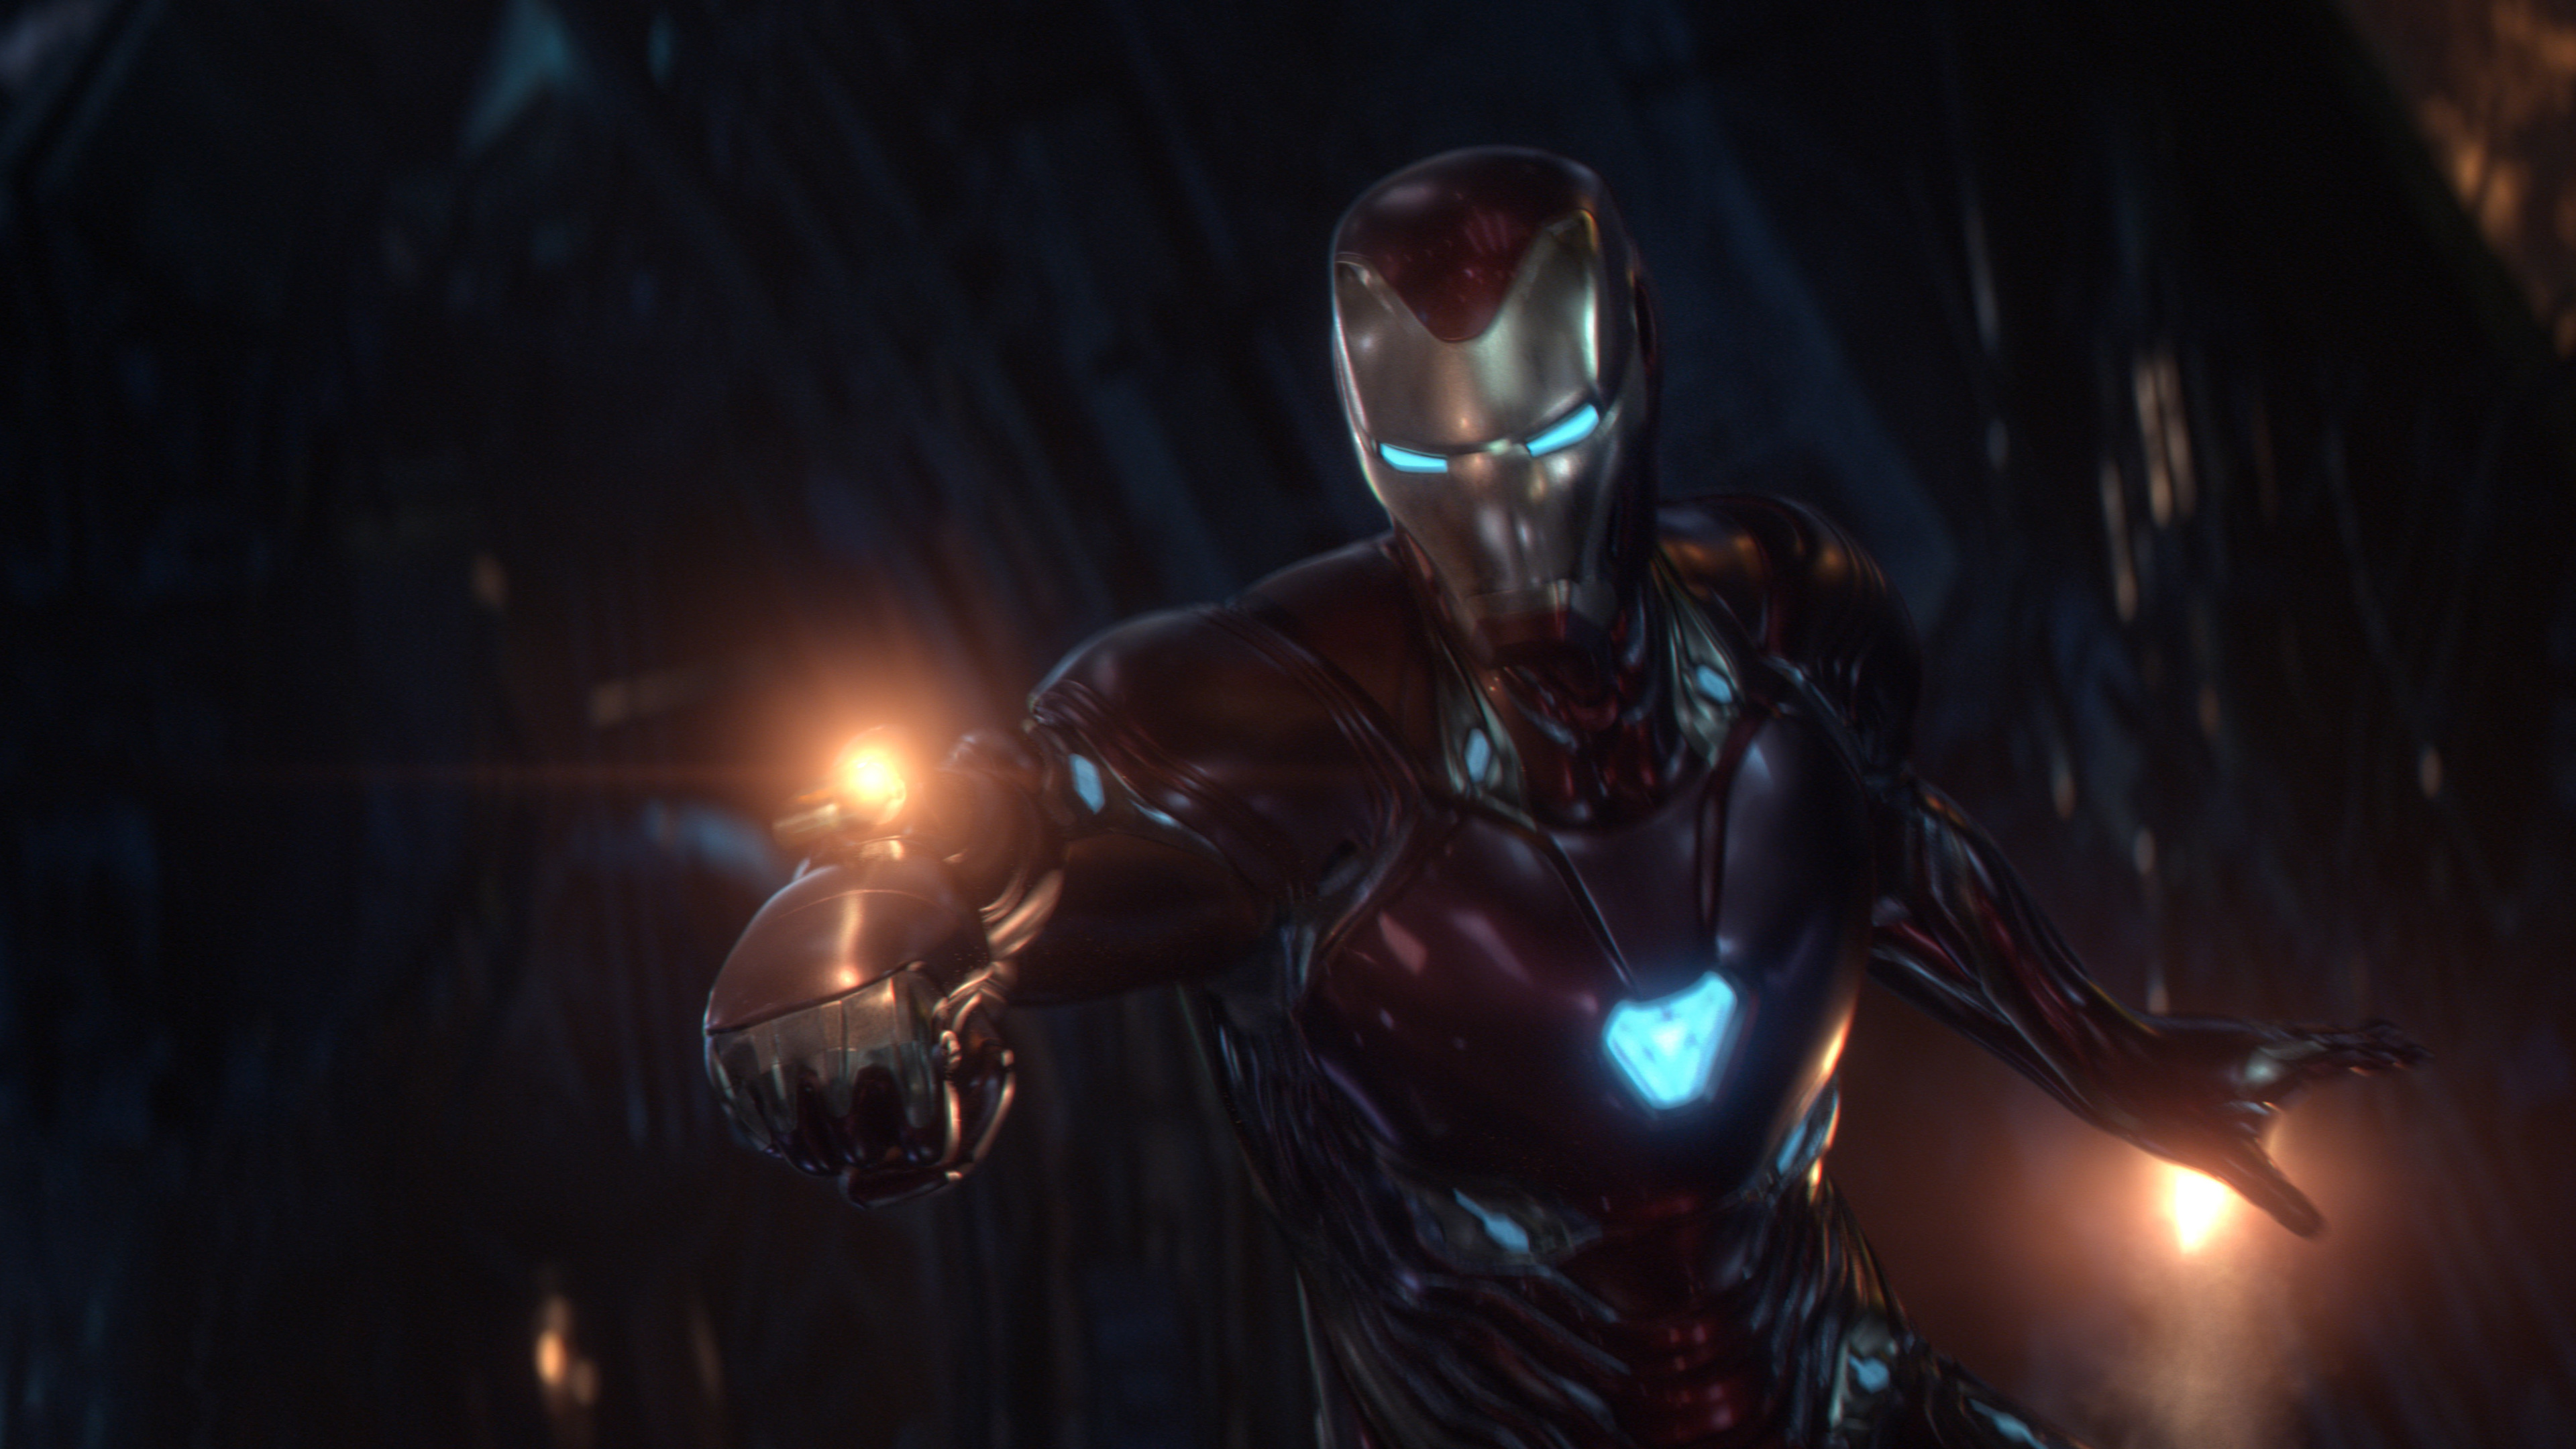 the armored iron avenger 1537645649 - The Armored Iron Avenger - movies wallpapers, iron man wallpapers, hd-wallpapers, avengers-infinity-war-wallpapers, 4k-wallpapers, 2018-movies-wallpapers